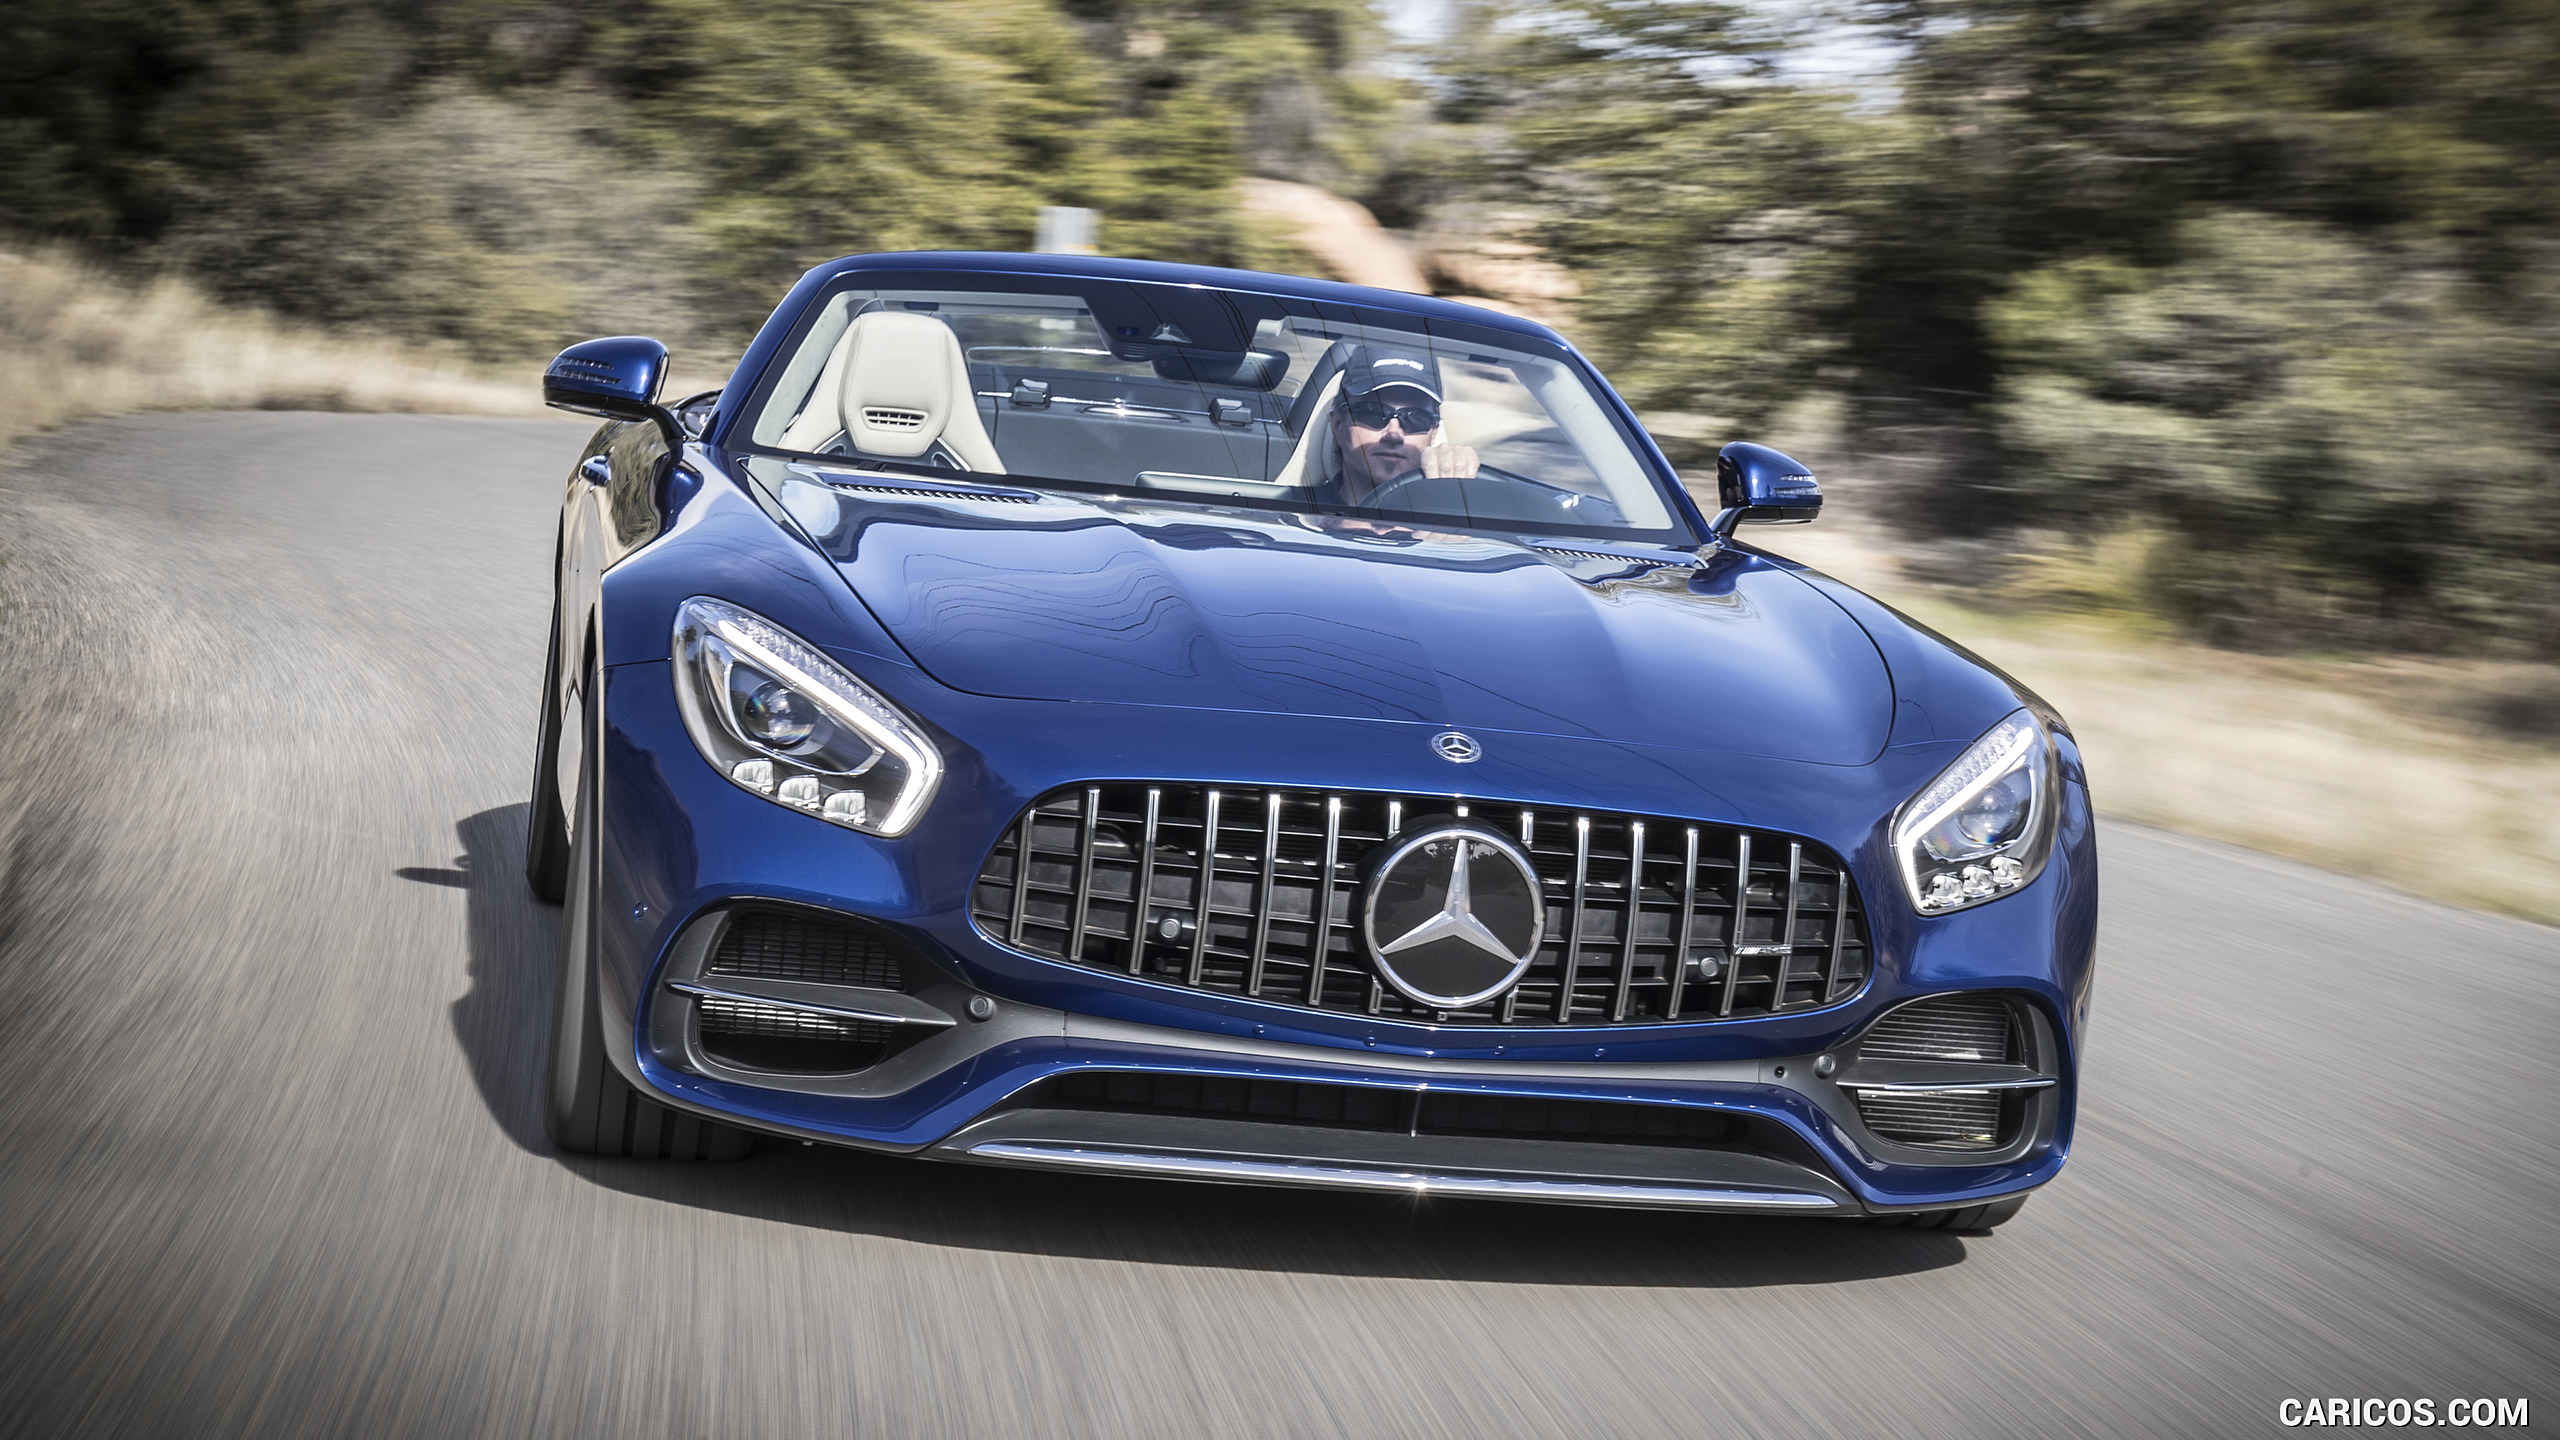 2018 Mercedes-AMG GT Roadster - Front, #139 of 350